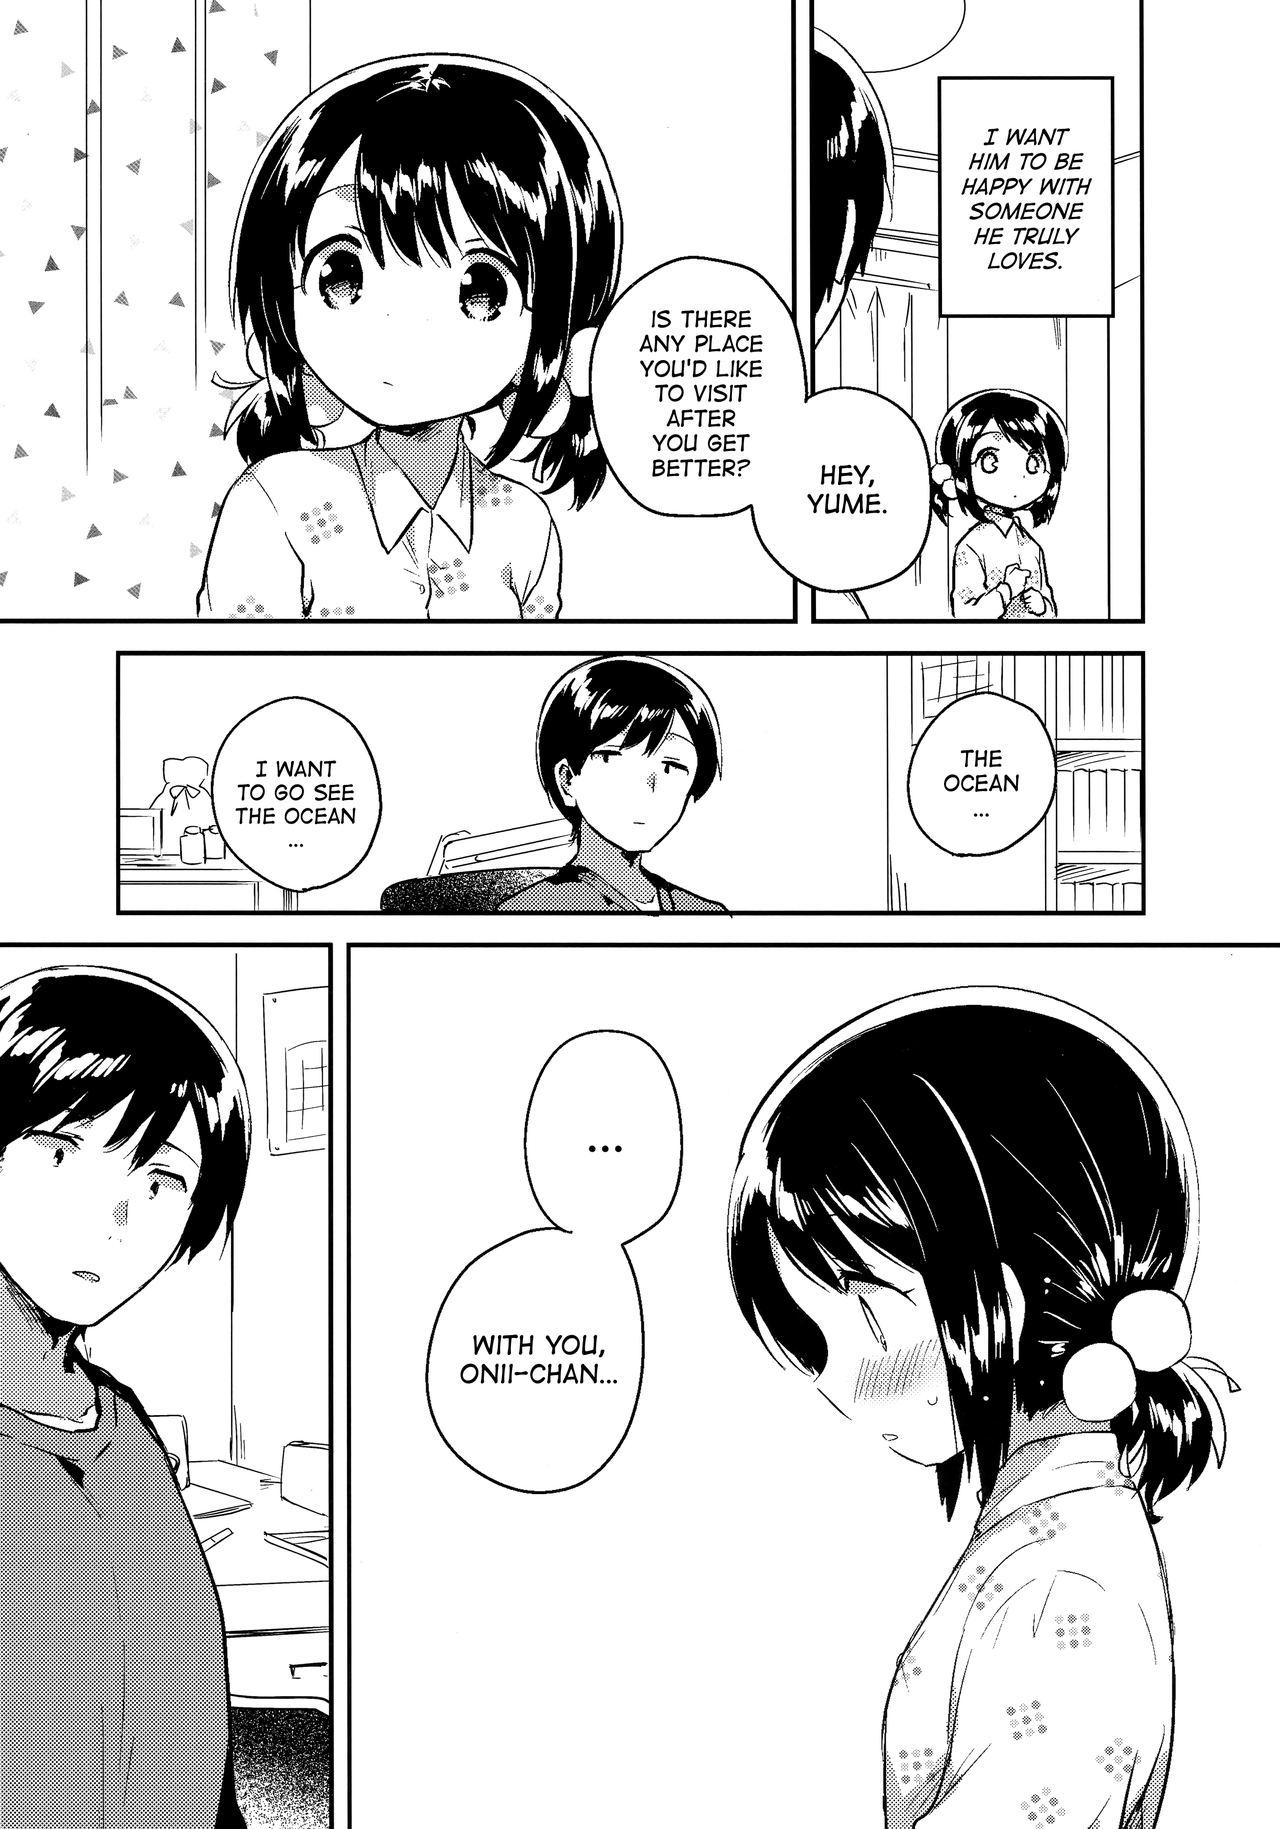 Holes Imouto wa Sickness no Omake | My Little Sister is Sickly: Extra Story Zorra - Page 7